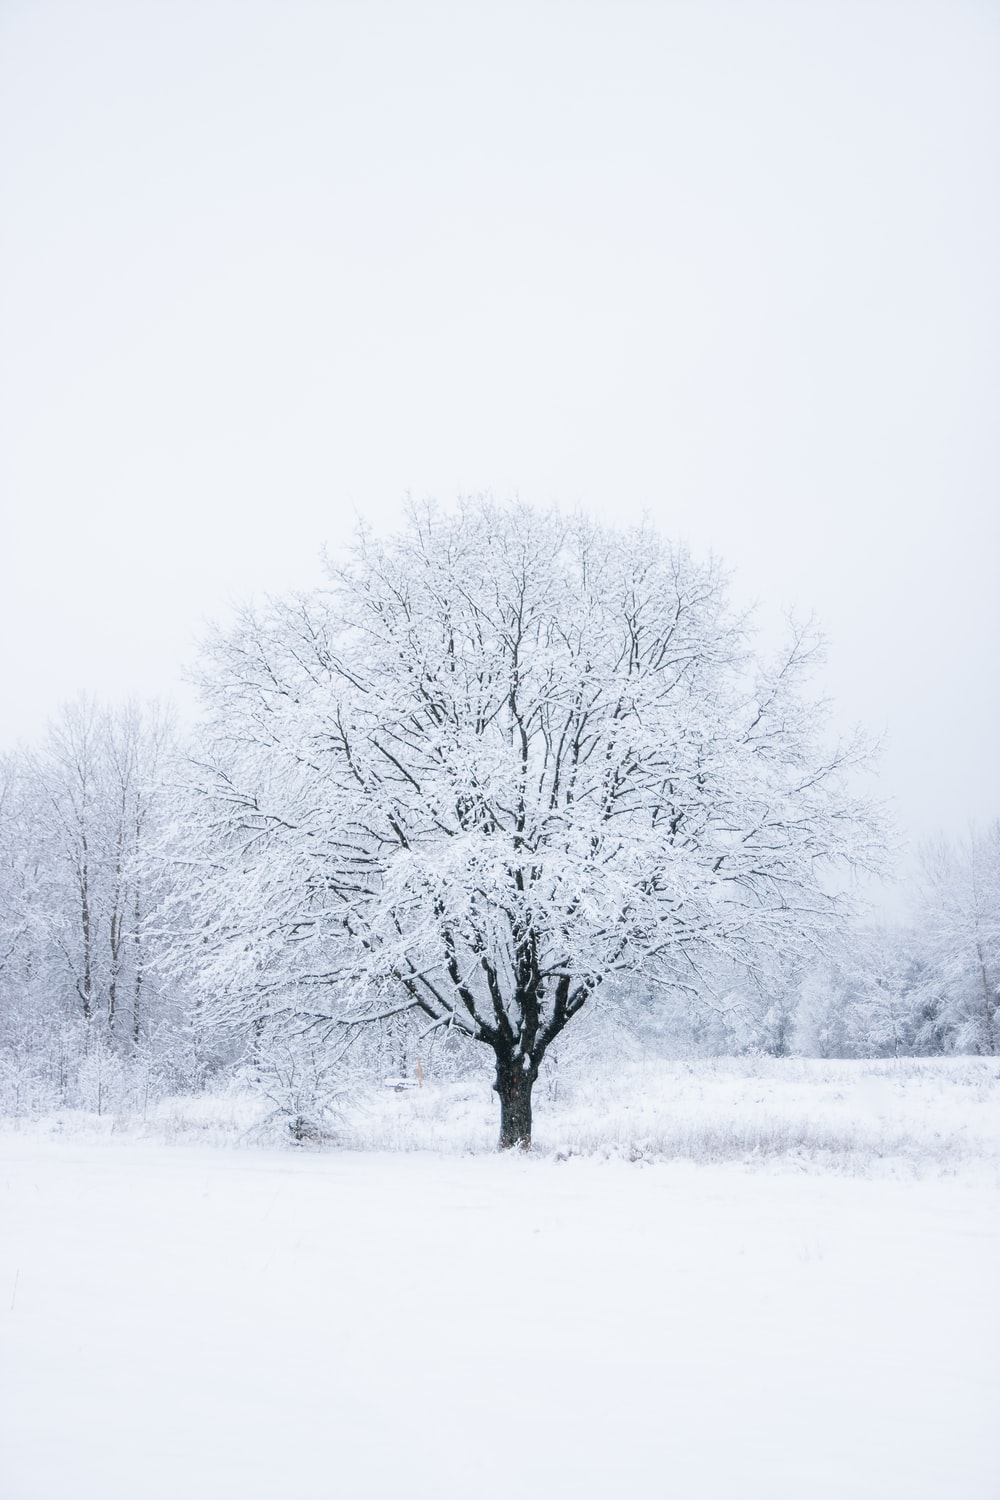 Winter Tree Picture. Download Free Image